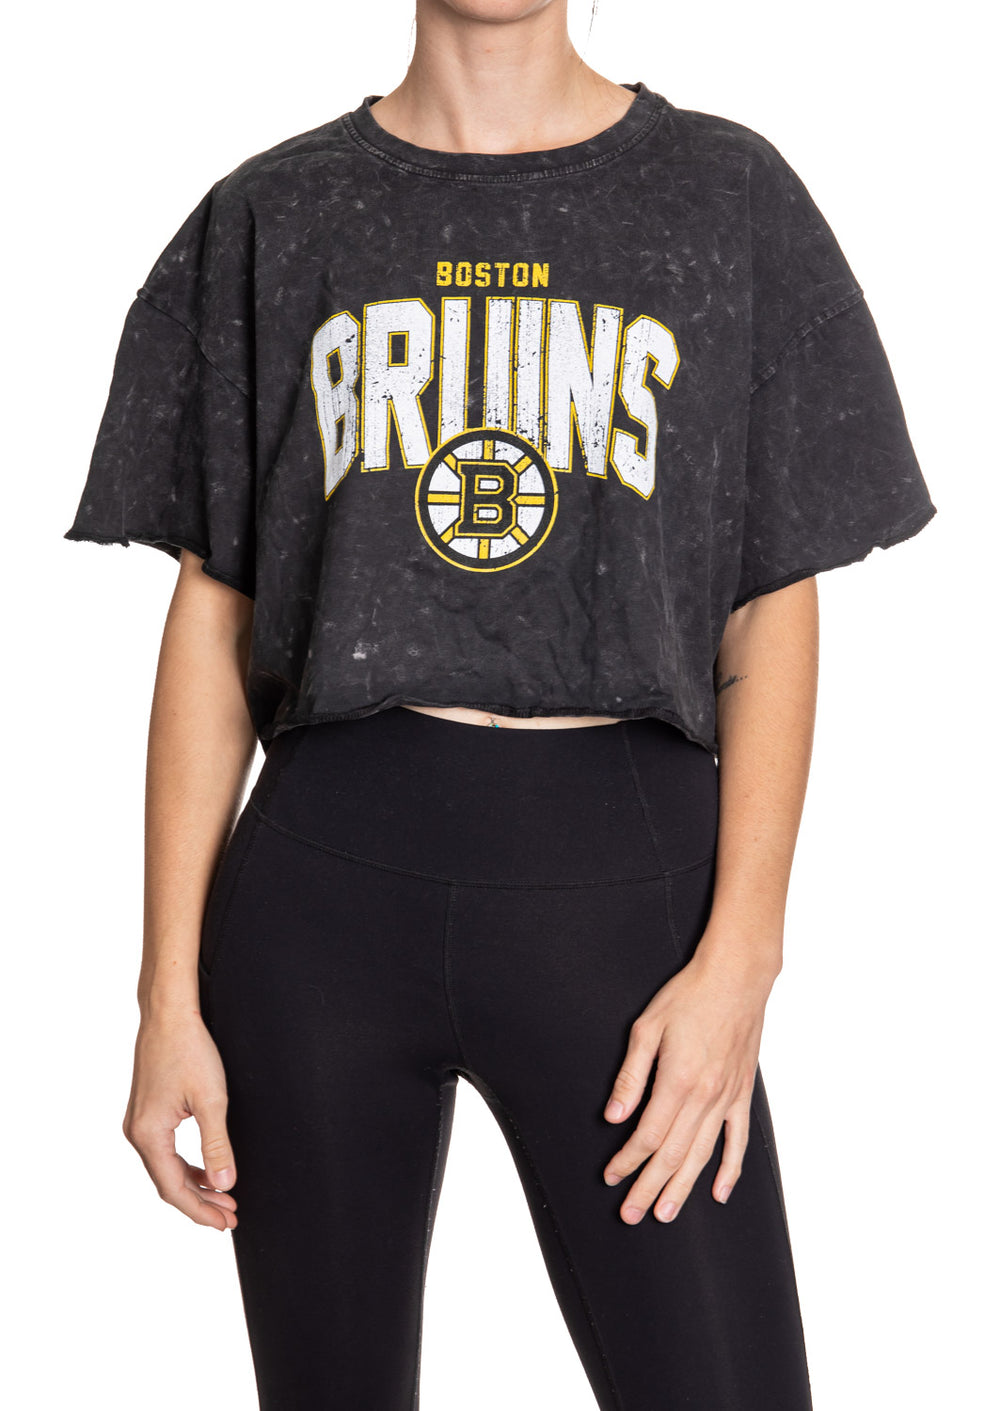 Woman standing in front of a white background wearing an oversized, black, acid wash crop top - featuring a Boston Bruins logo in the center of the shirt.